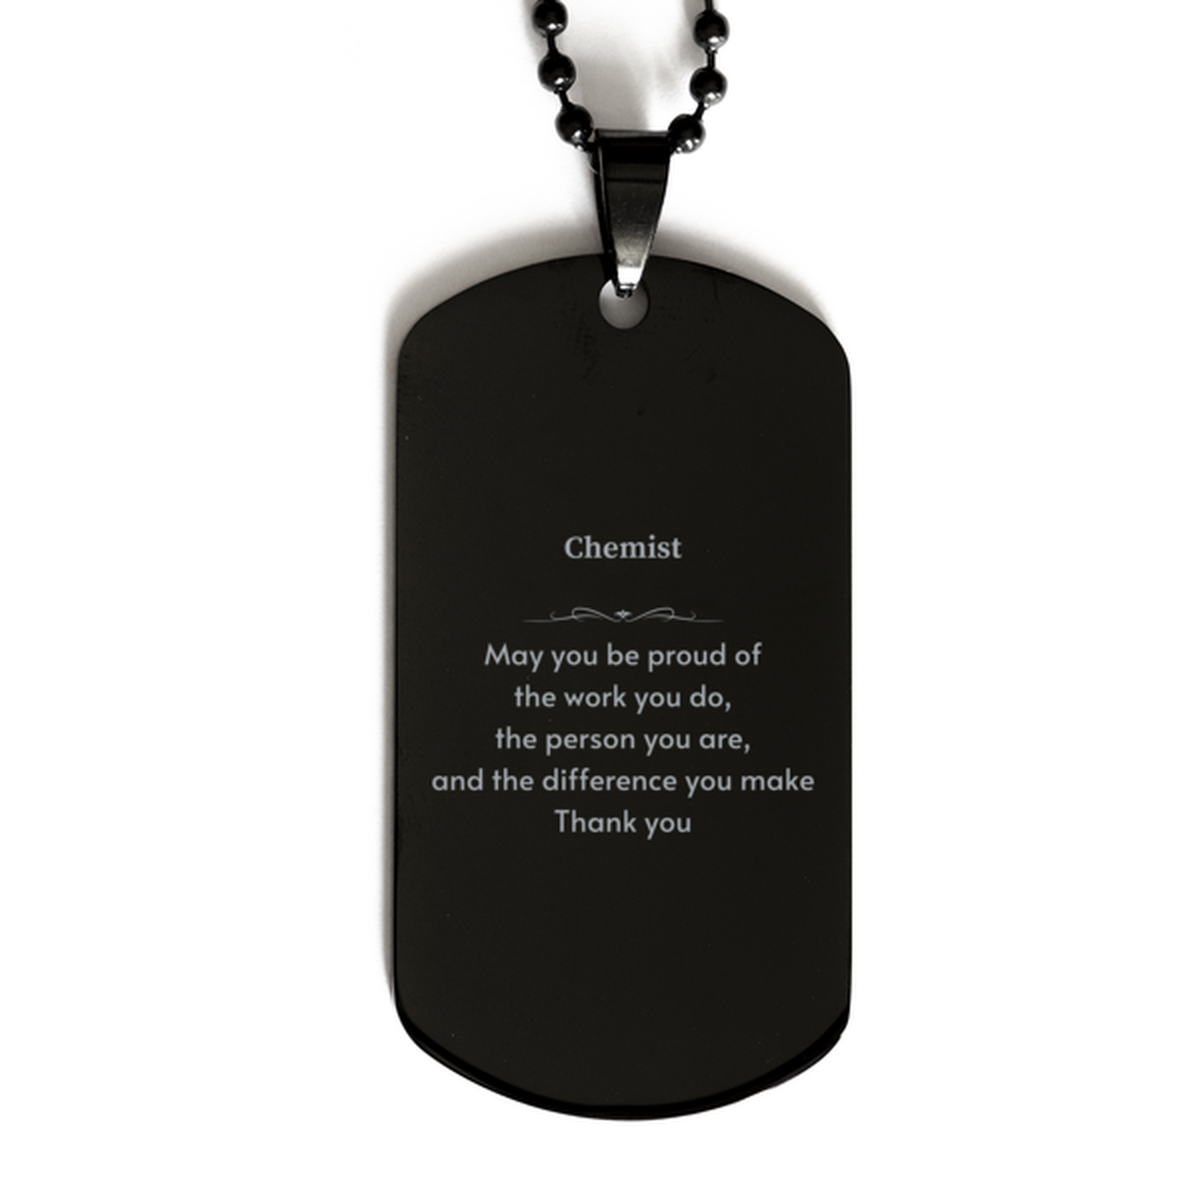 Heartwarming Black Dog Tag Retirement Coworkers Gifts for Chemist, Chemist May You be proud of the work you do, the person you are Gifts for Boss Men Women Friends